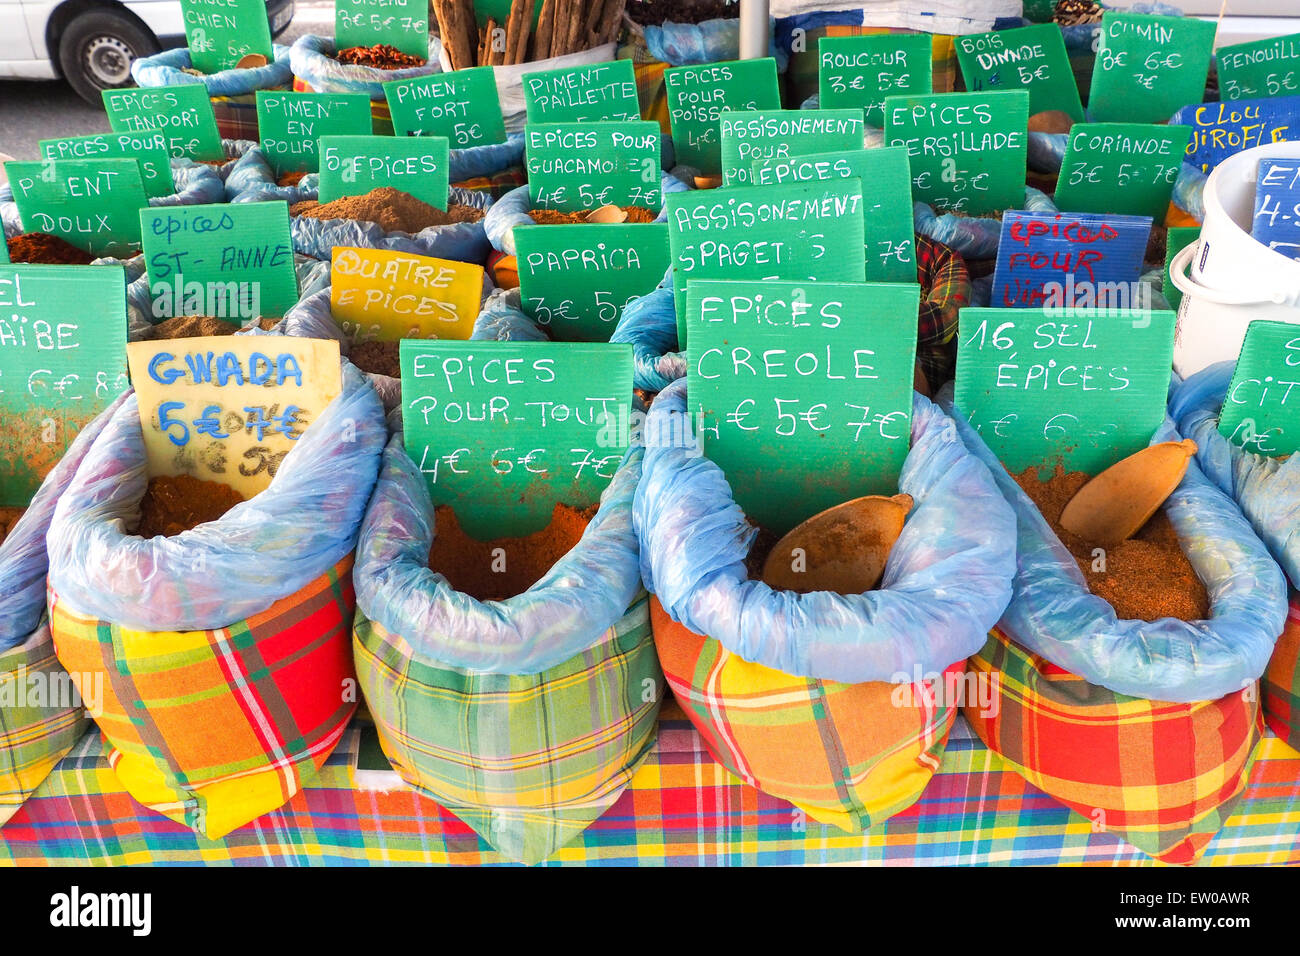 Several bags containing typical spices for cooking with tags reporting names and prices are exposed on a market stall Stock Photo